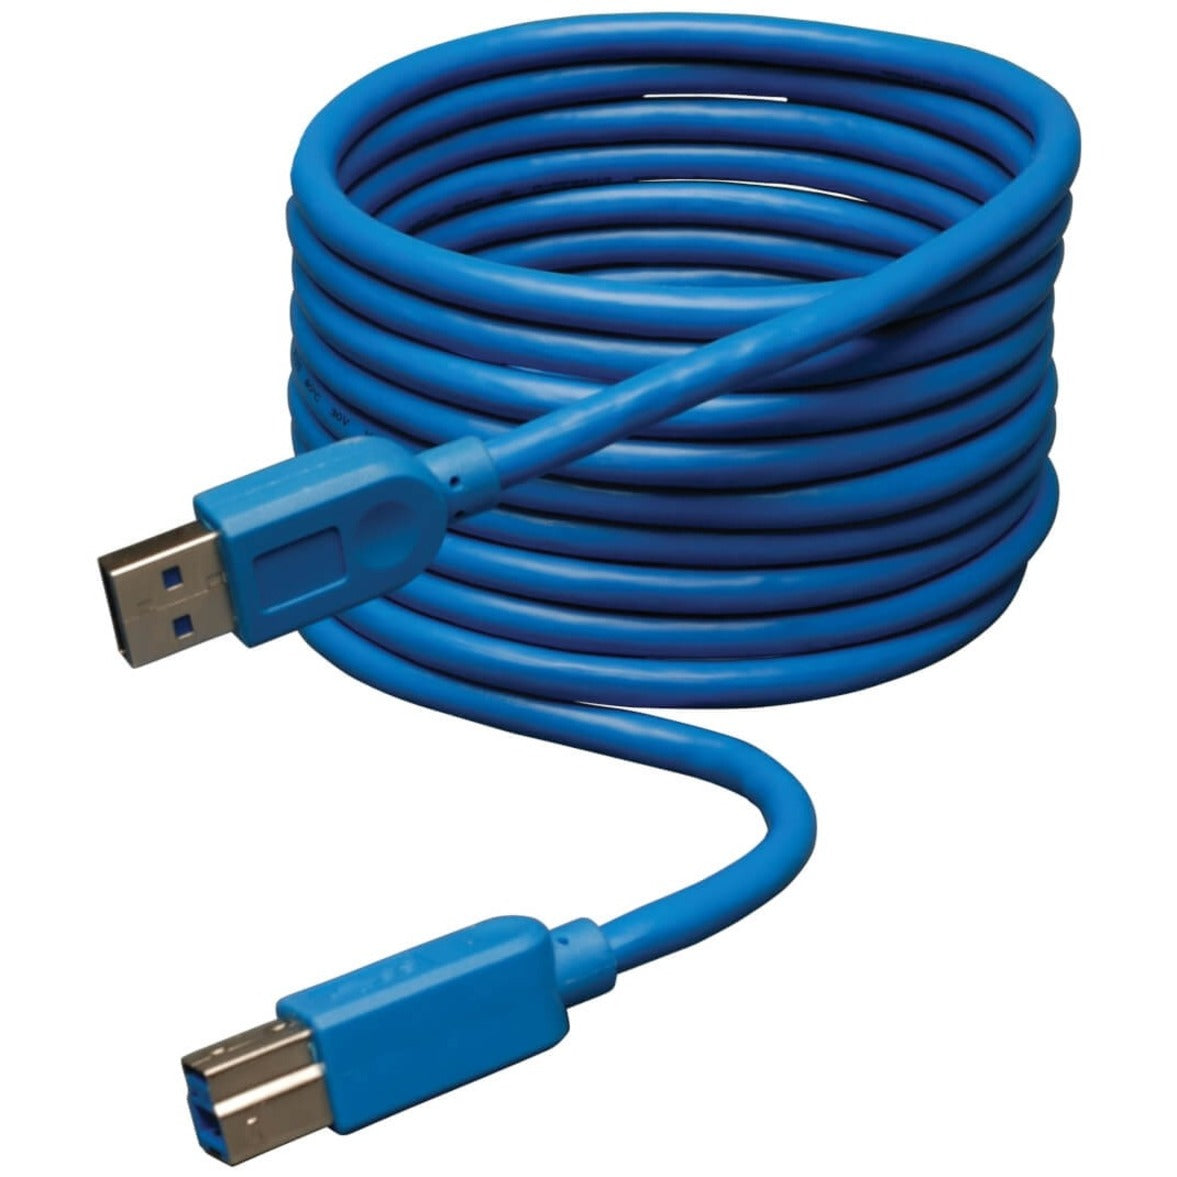 Tripp Lite U322-010 USB 3.0 Super Speed Device Cable AB 10FT, Blue - High-Speed Data Transfer for Your Devices